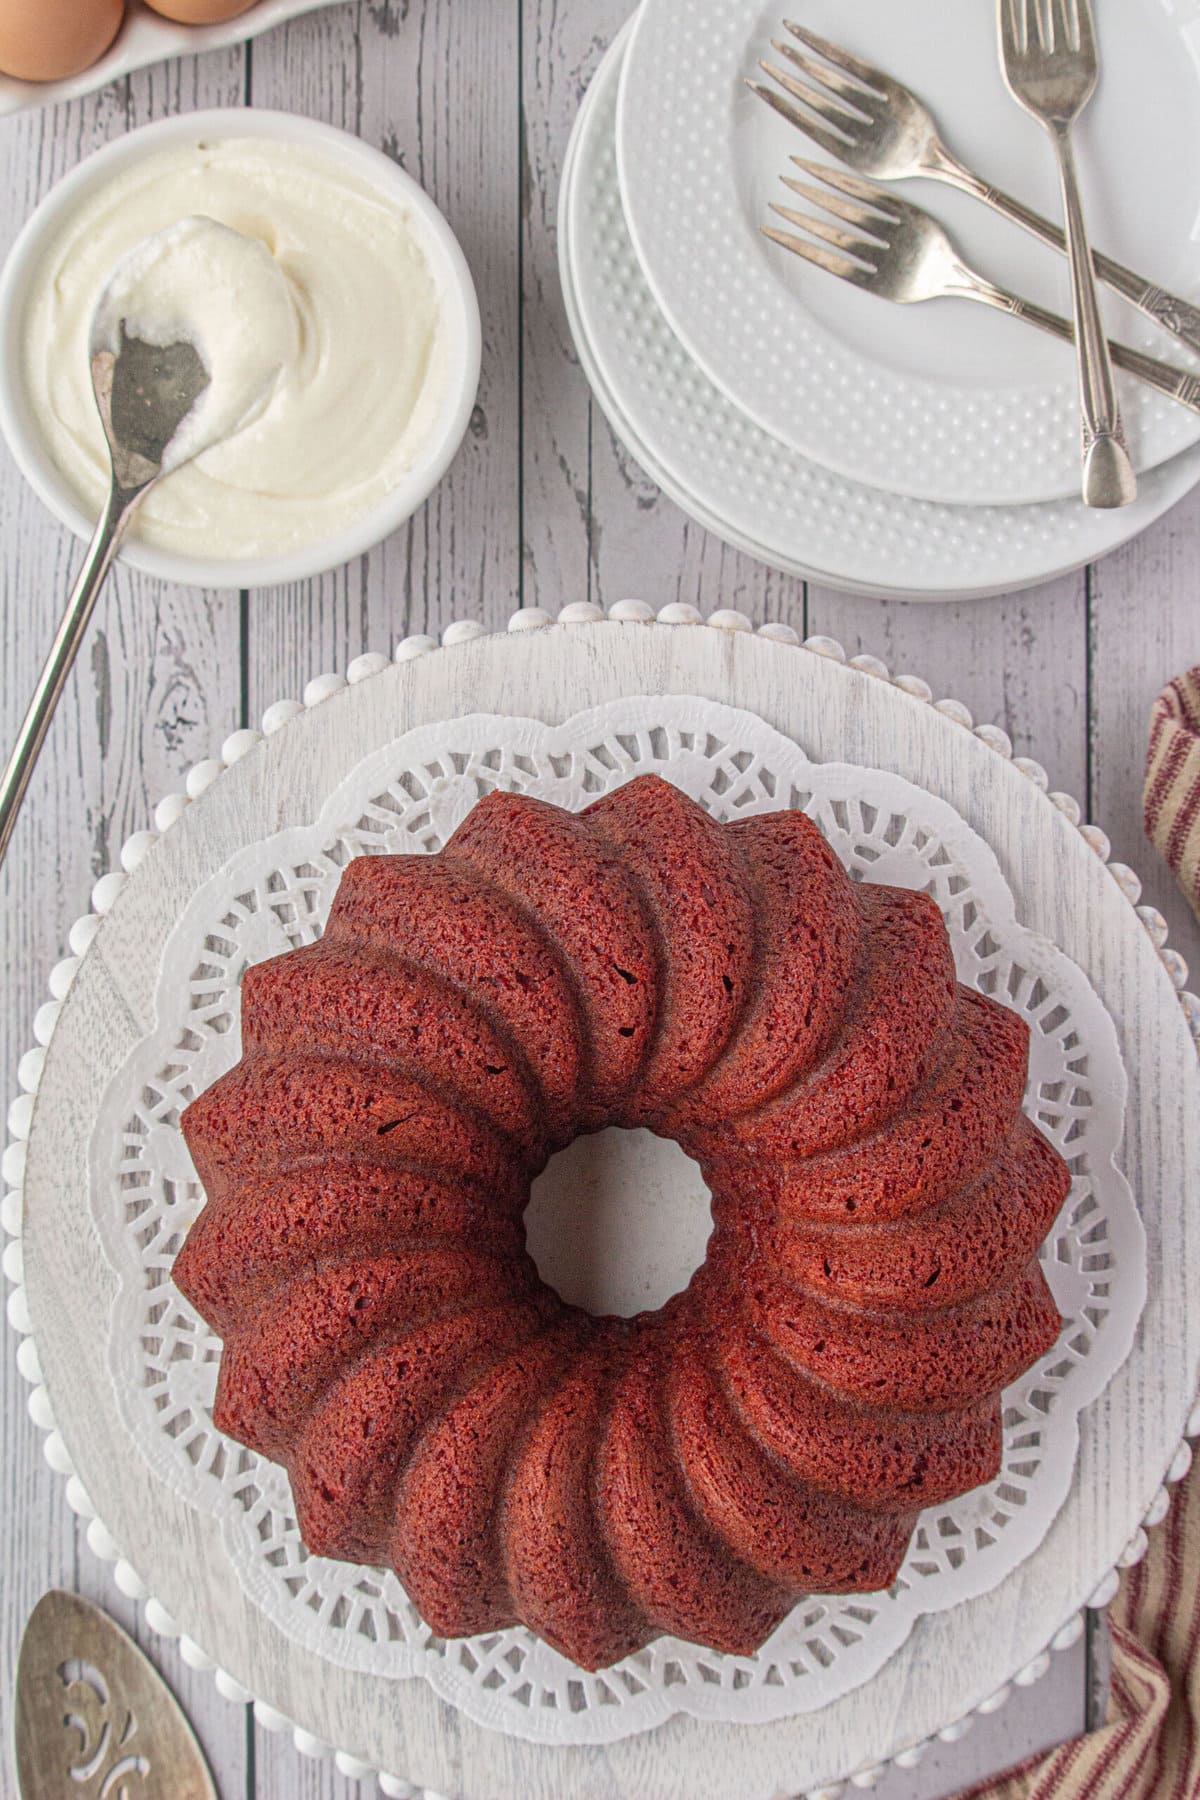 Overhead view of baked red velvet bundt cake without frosting.